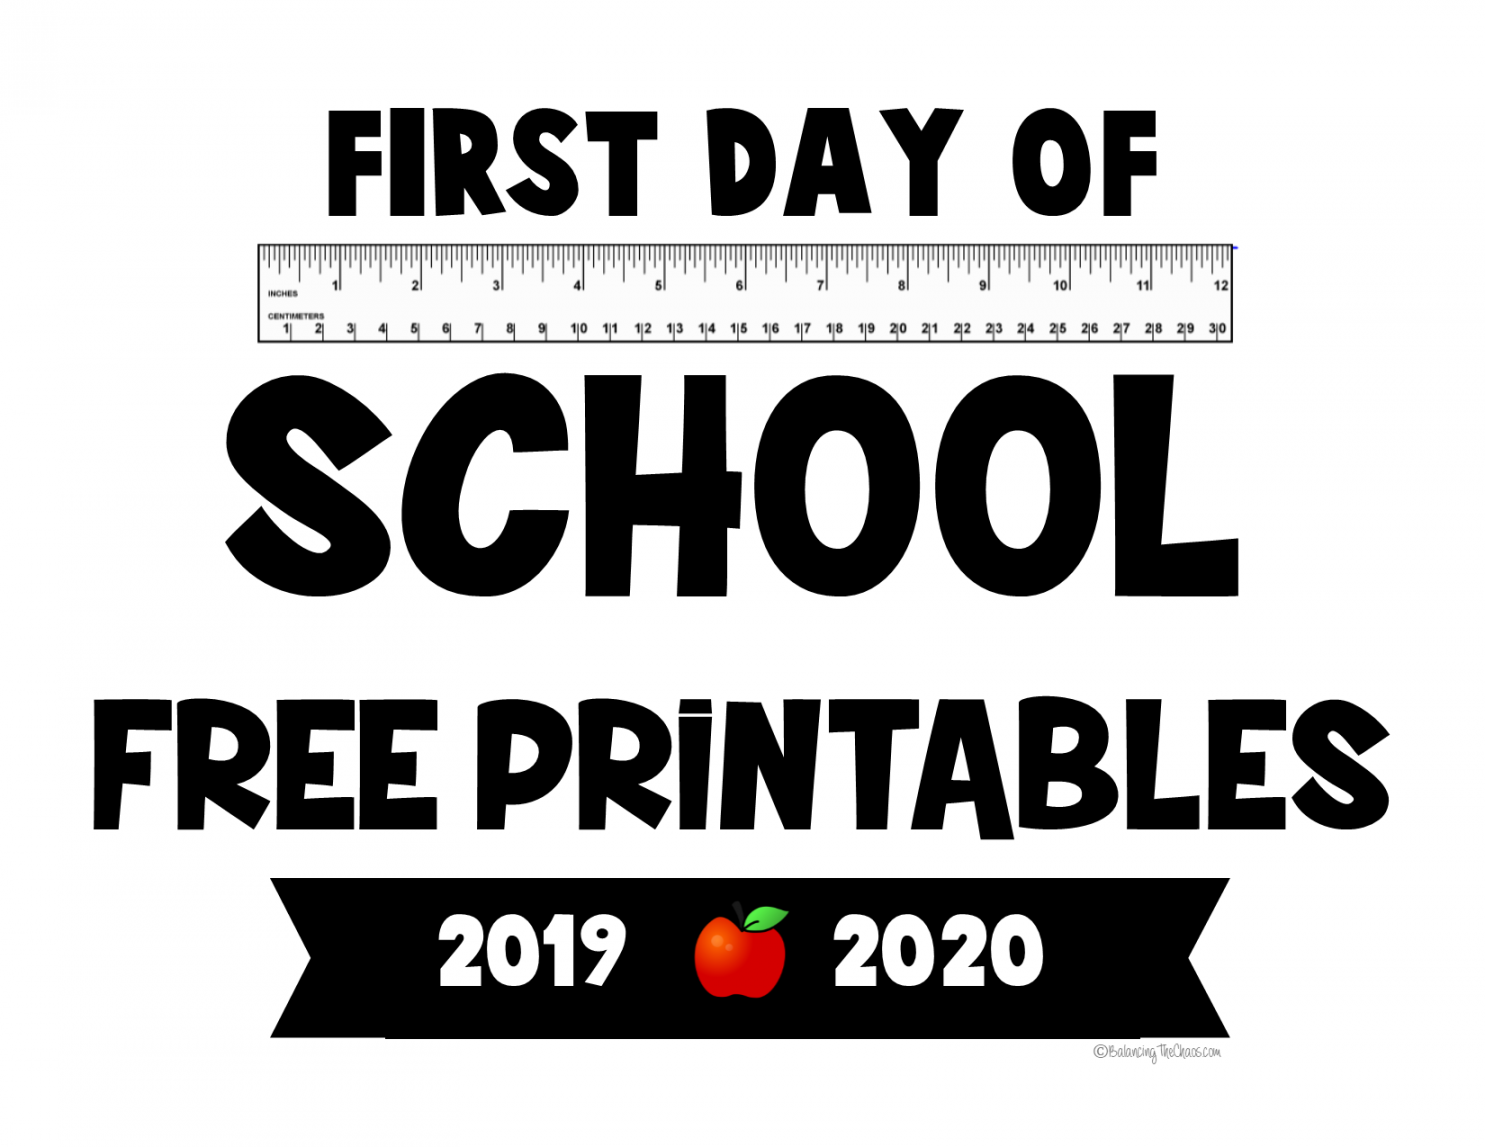 Free Printable First Day of School Sign - Printable - FREE PRINTABLE:  -  First Day of School Signs - Balancing